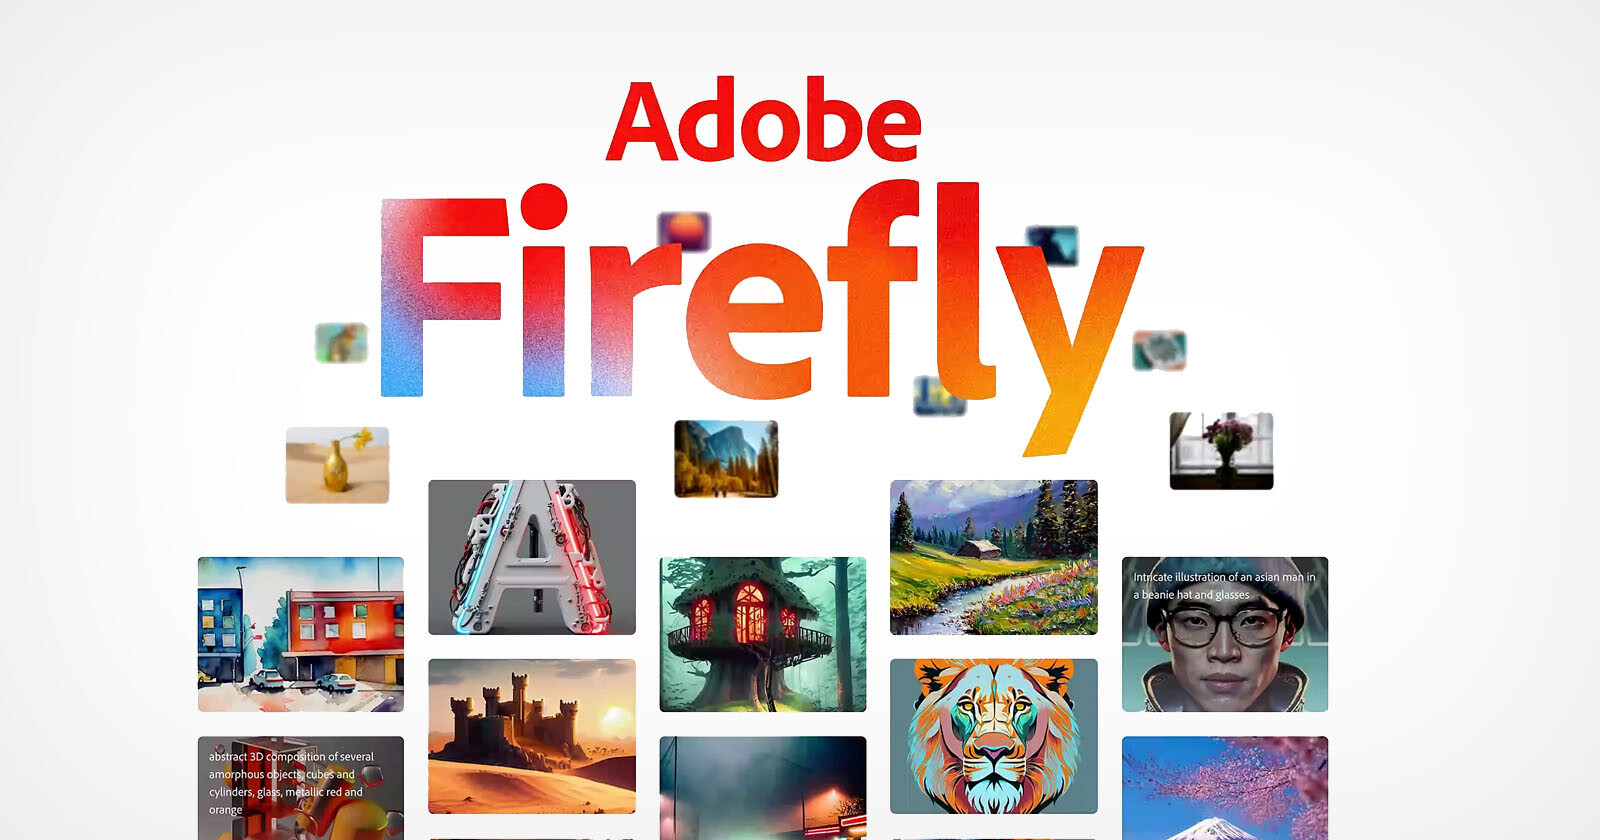  adobe making its firefly generative available big businesses 